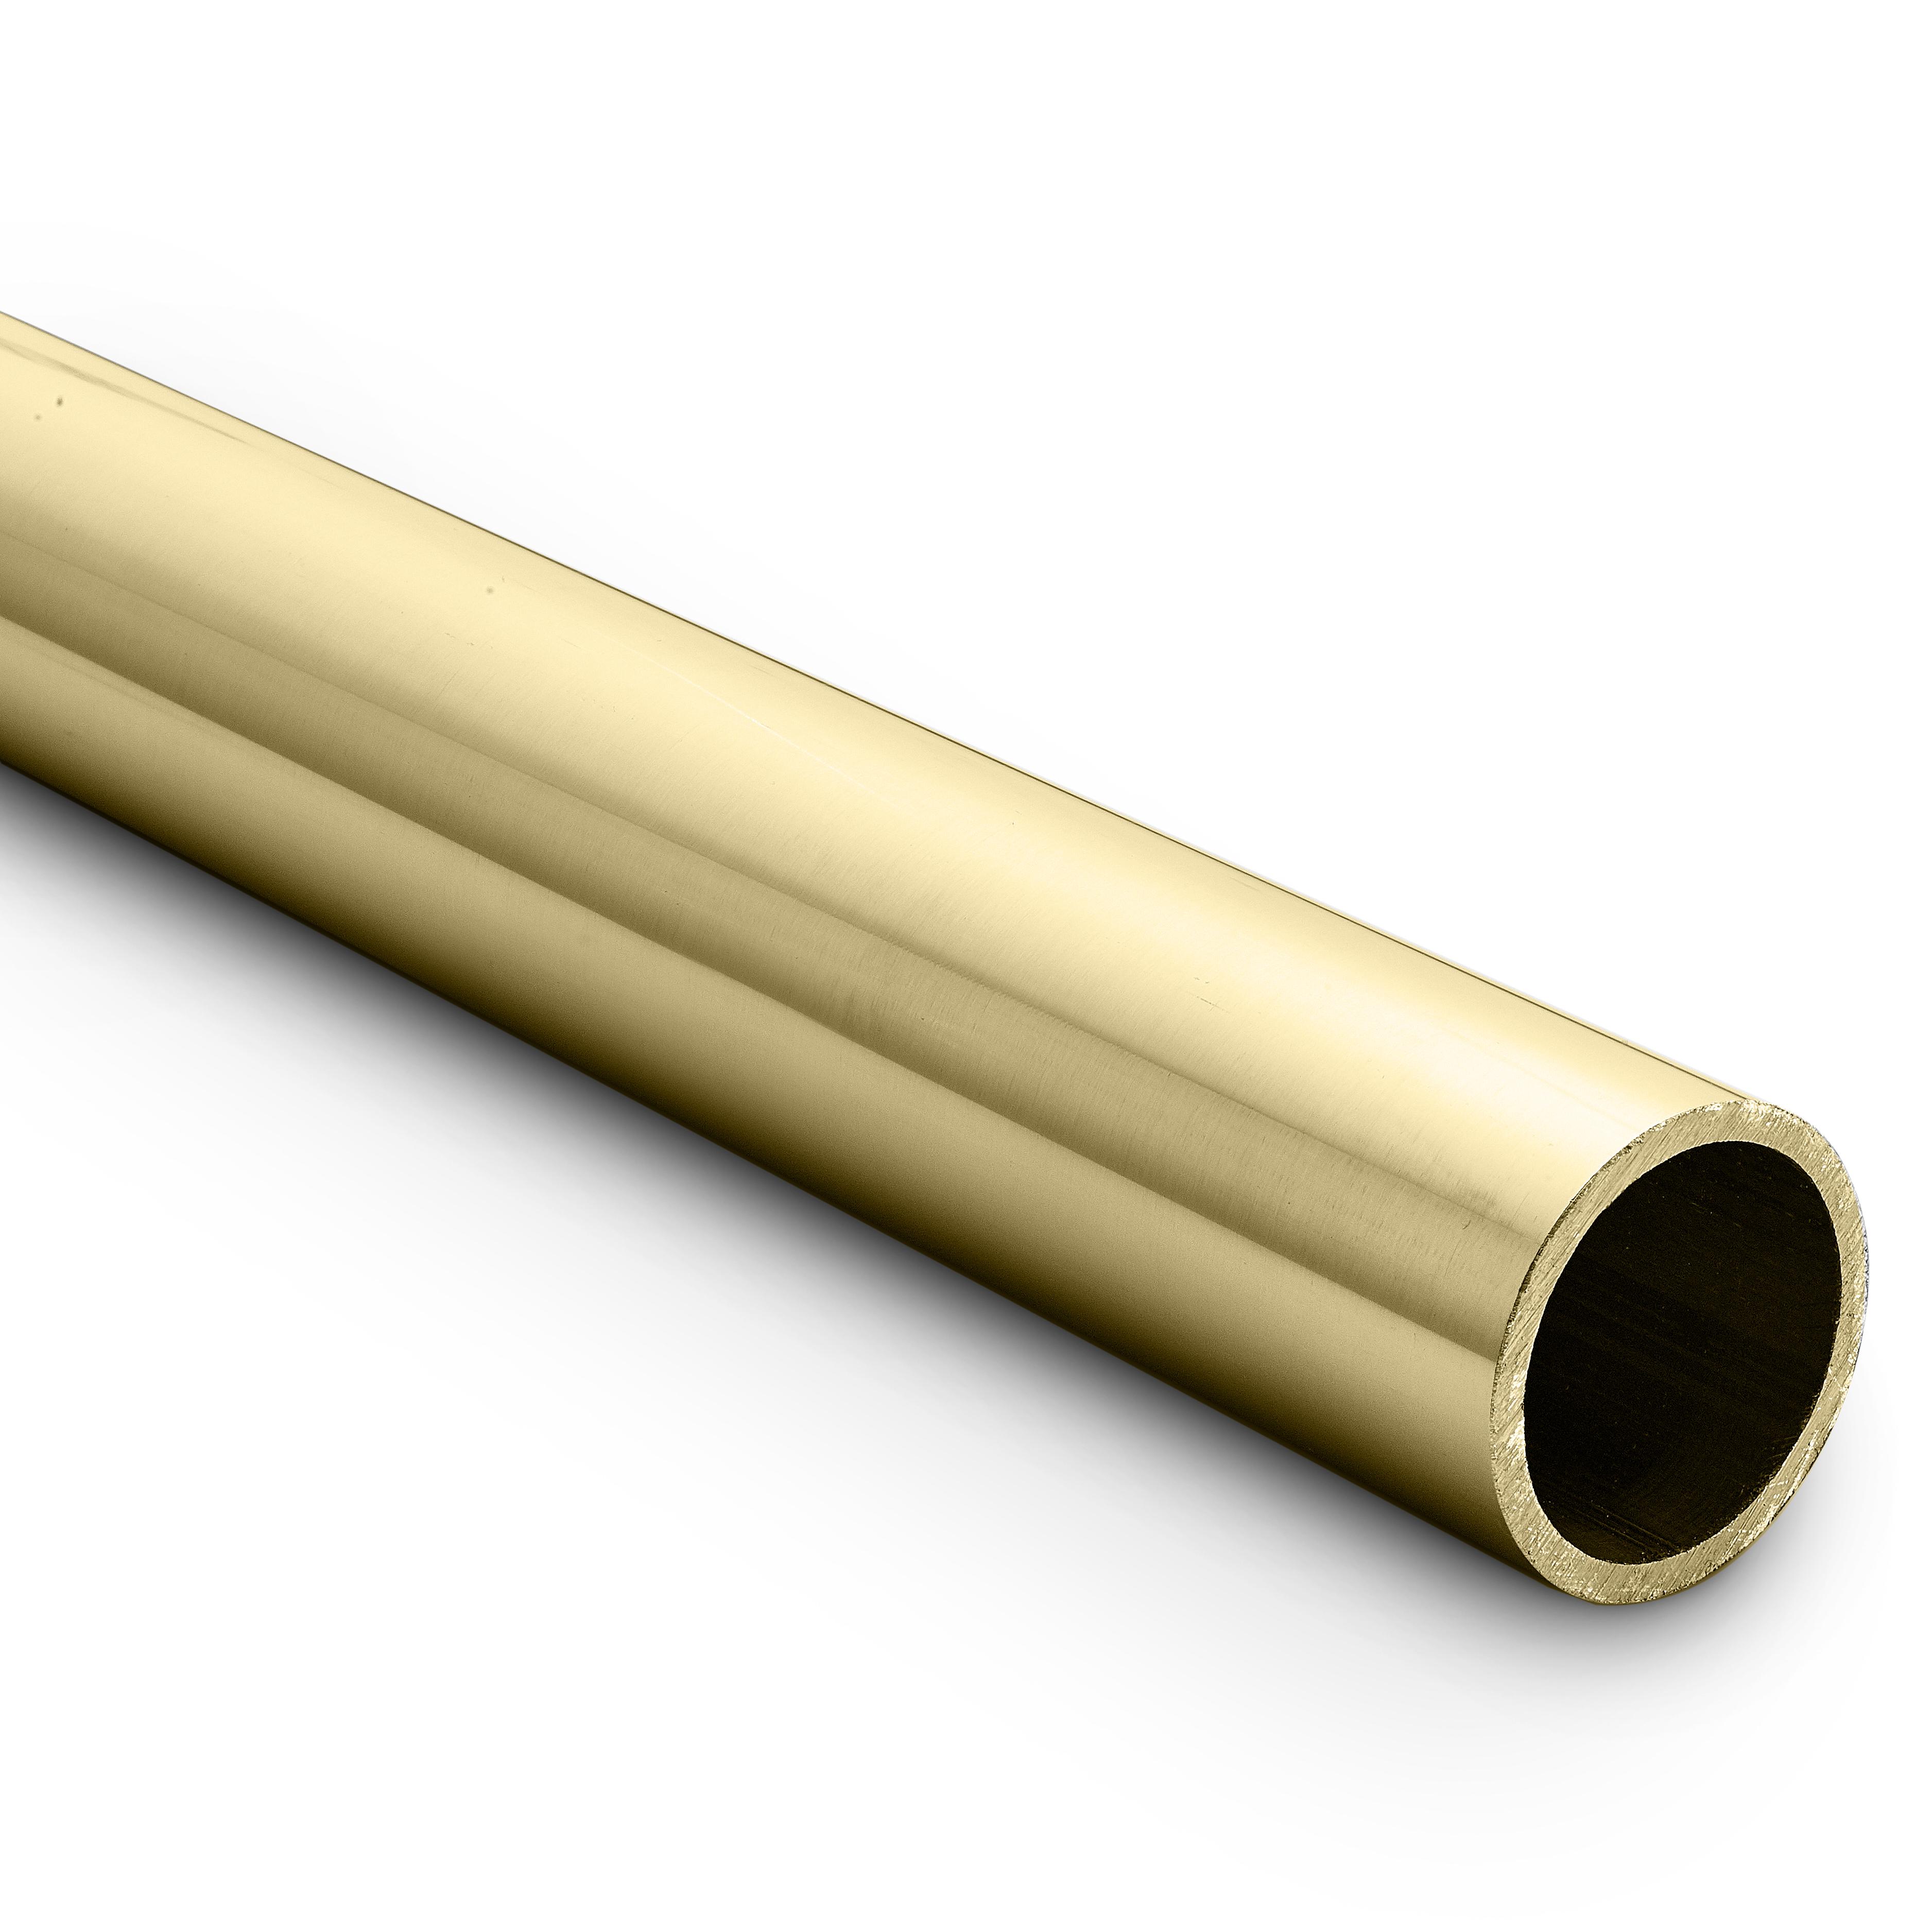 2.5 metre lengths Bright Polished Brass Tube